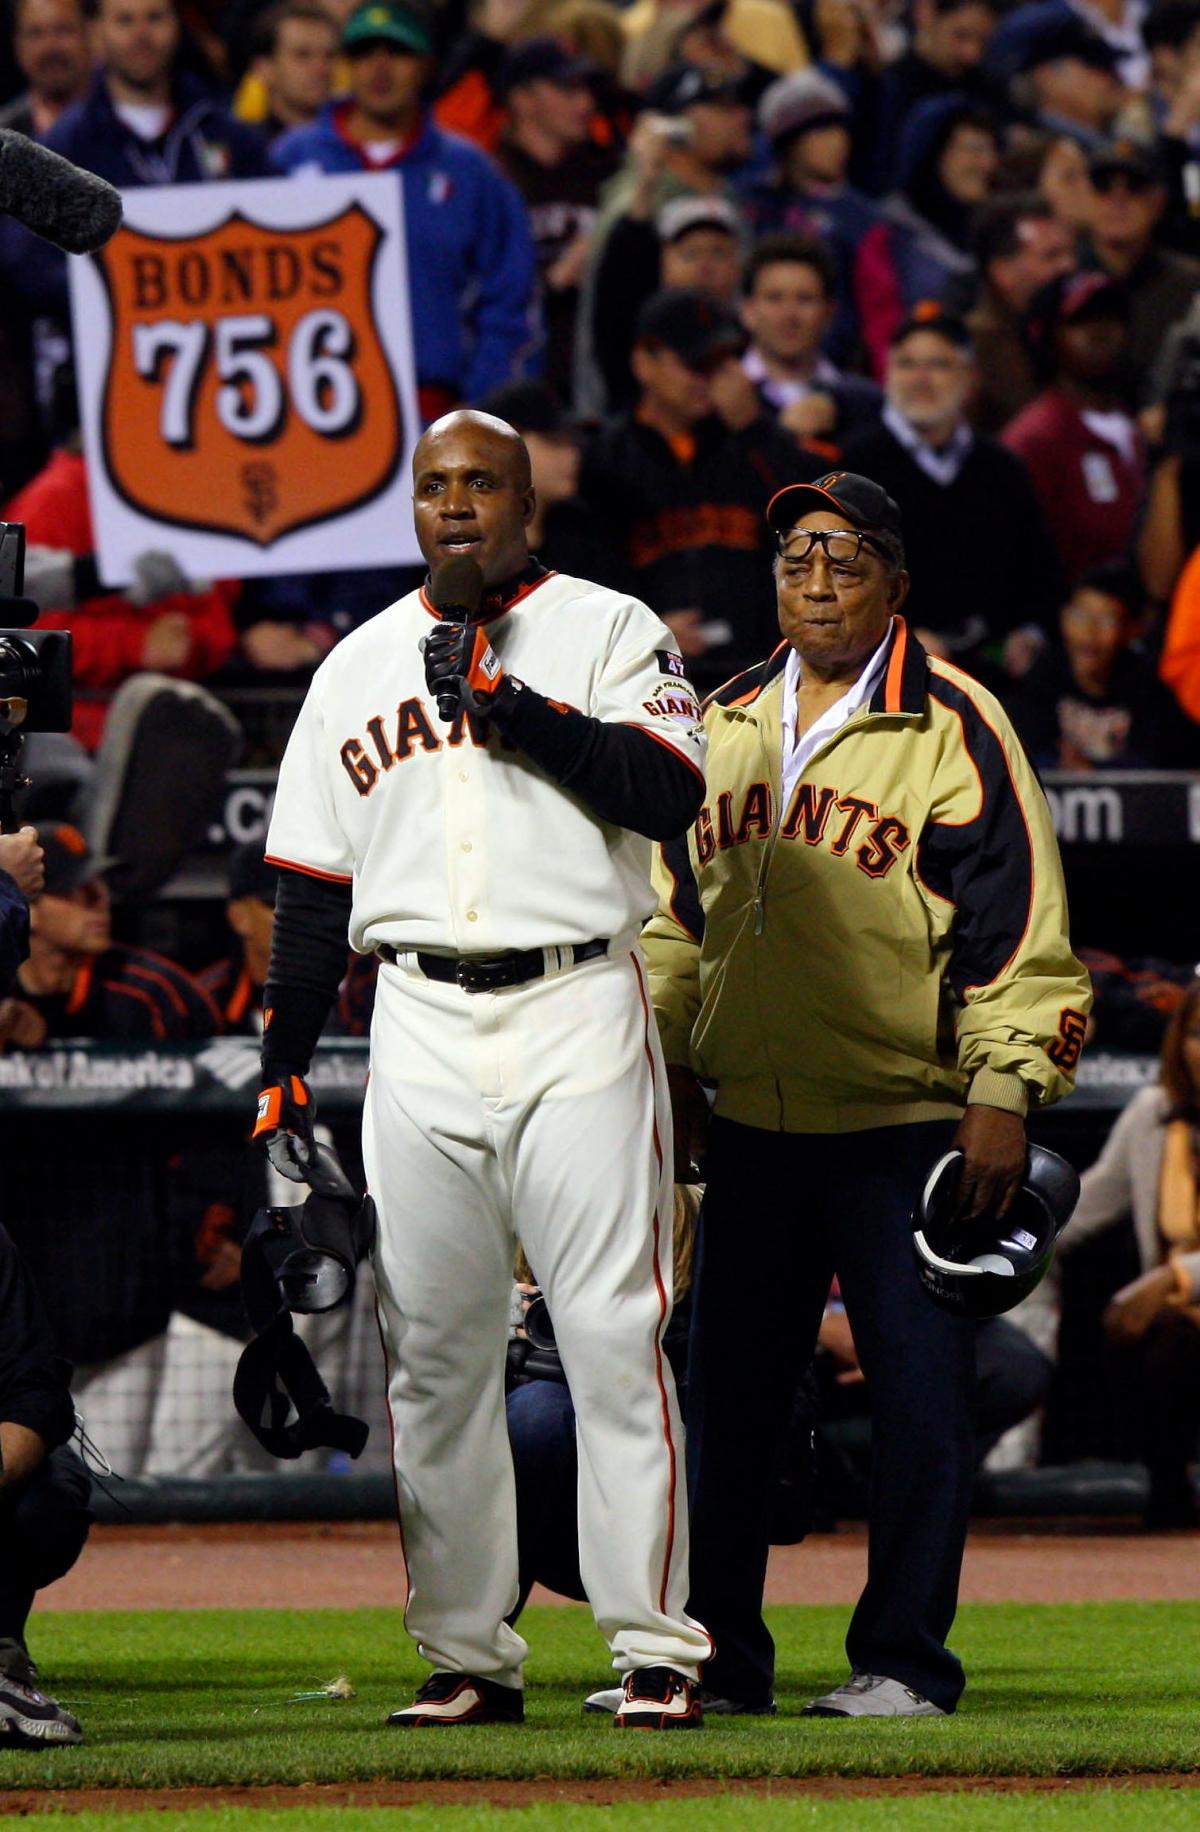 Barry Bonds releases emotional message after Willie Mays’ death